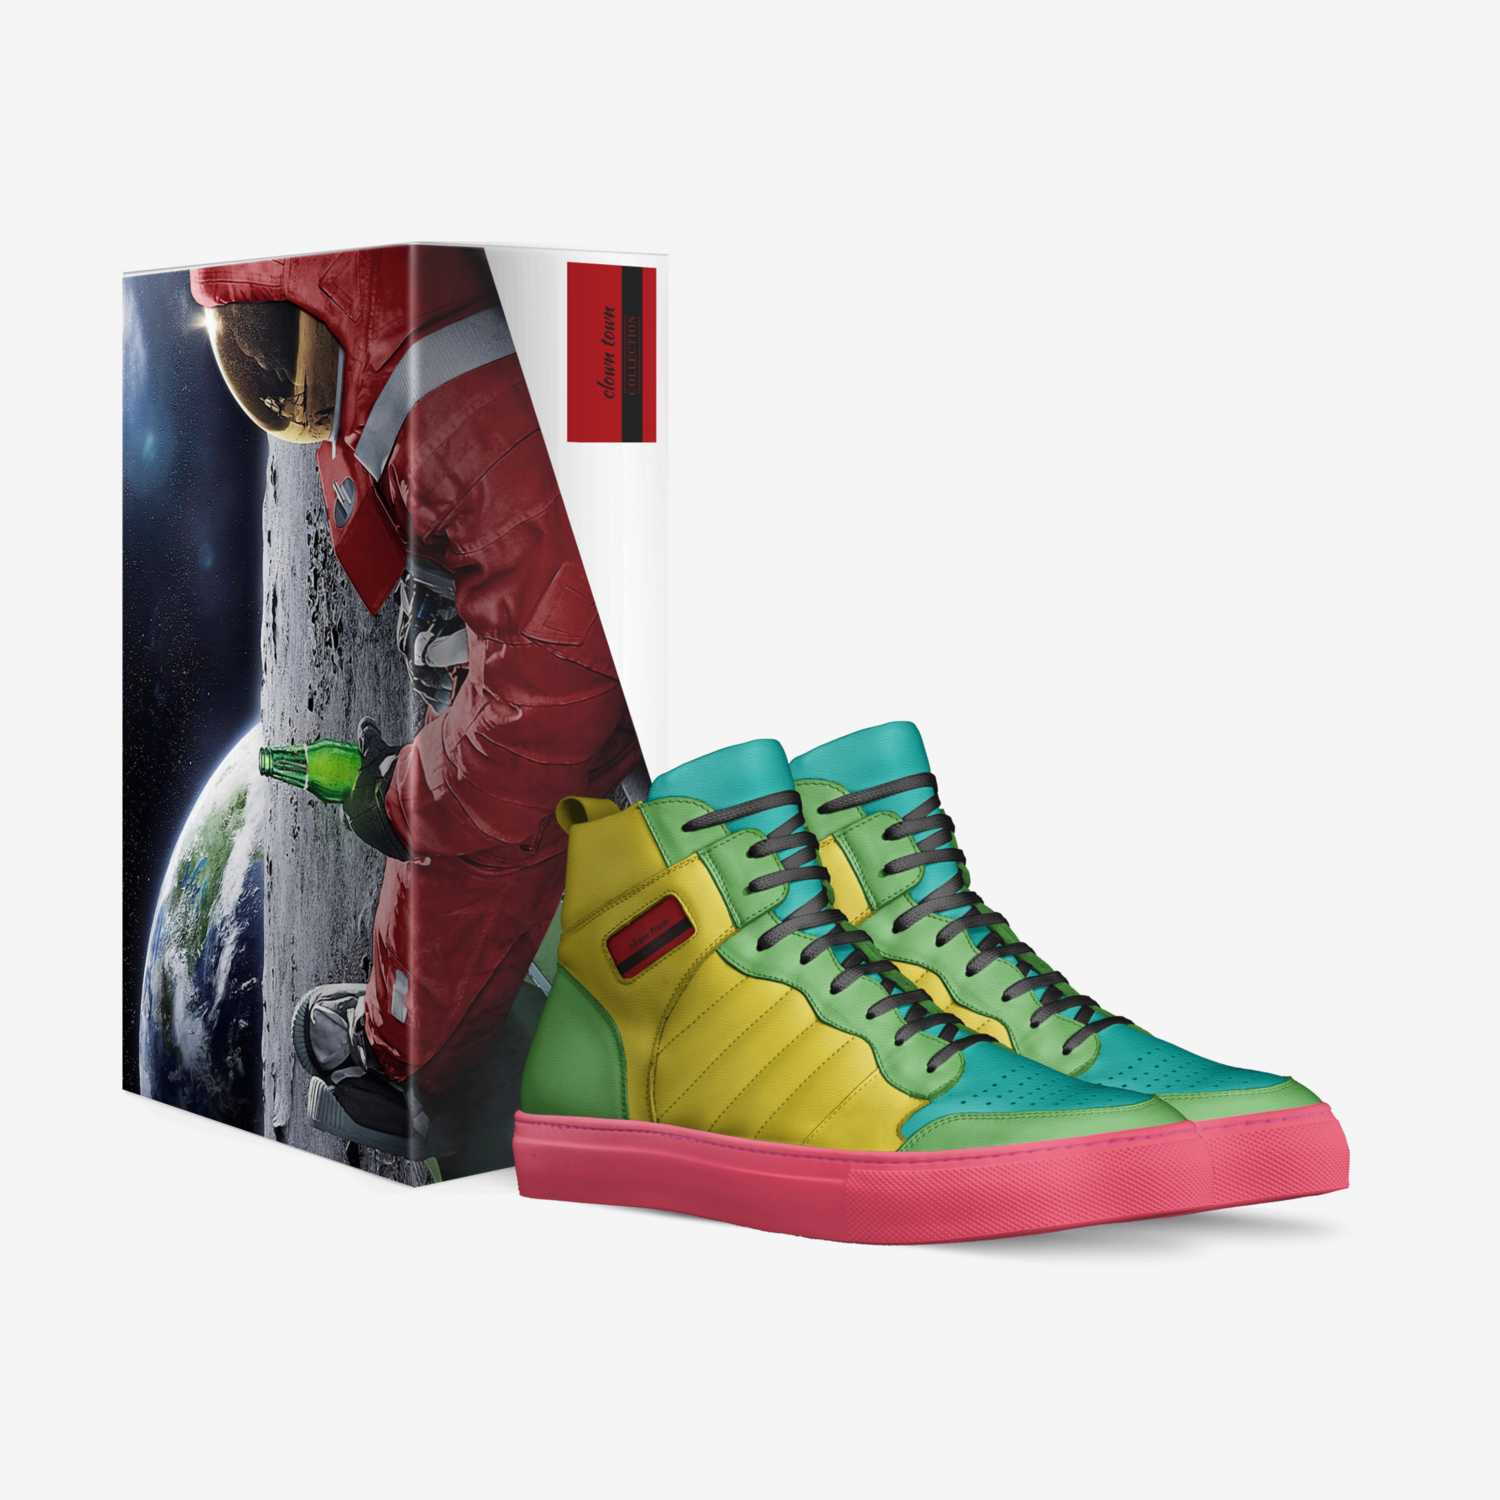 clown town custom made in Italy shoes by Jasmine Elexis Watts | Box view